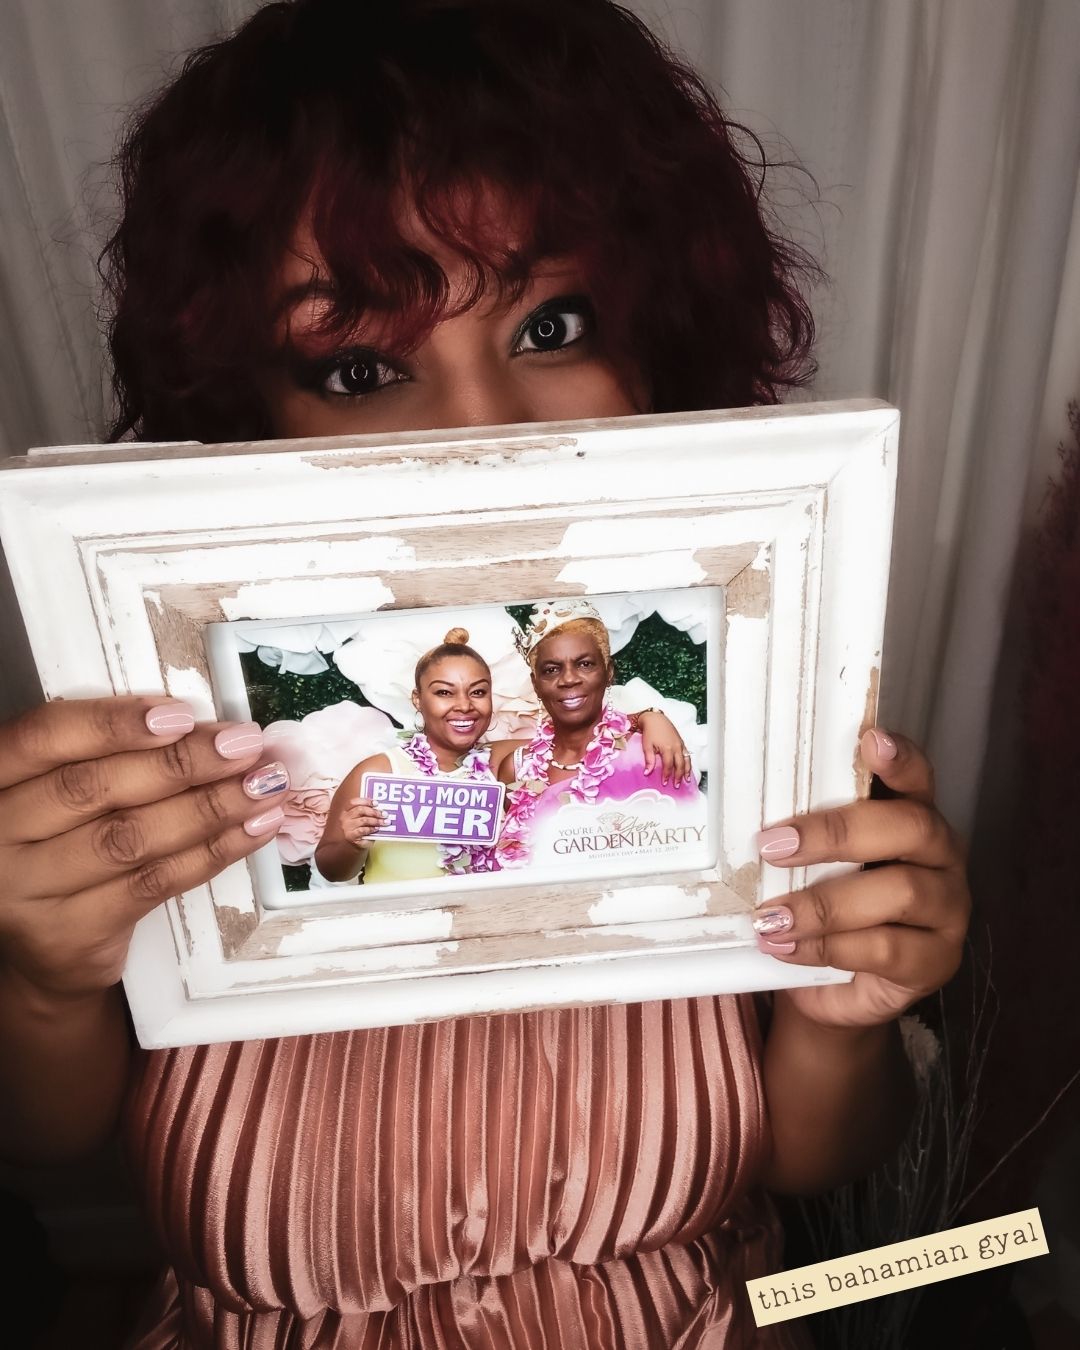 This Bahamian Gyal blogger, Rogan Smith hides her face with a photo of her mother.